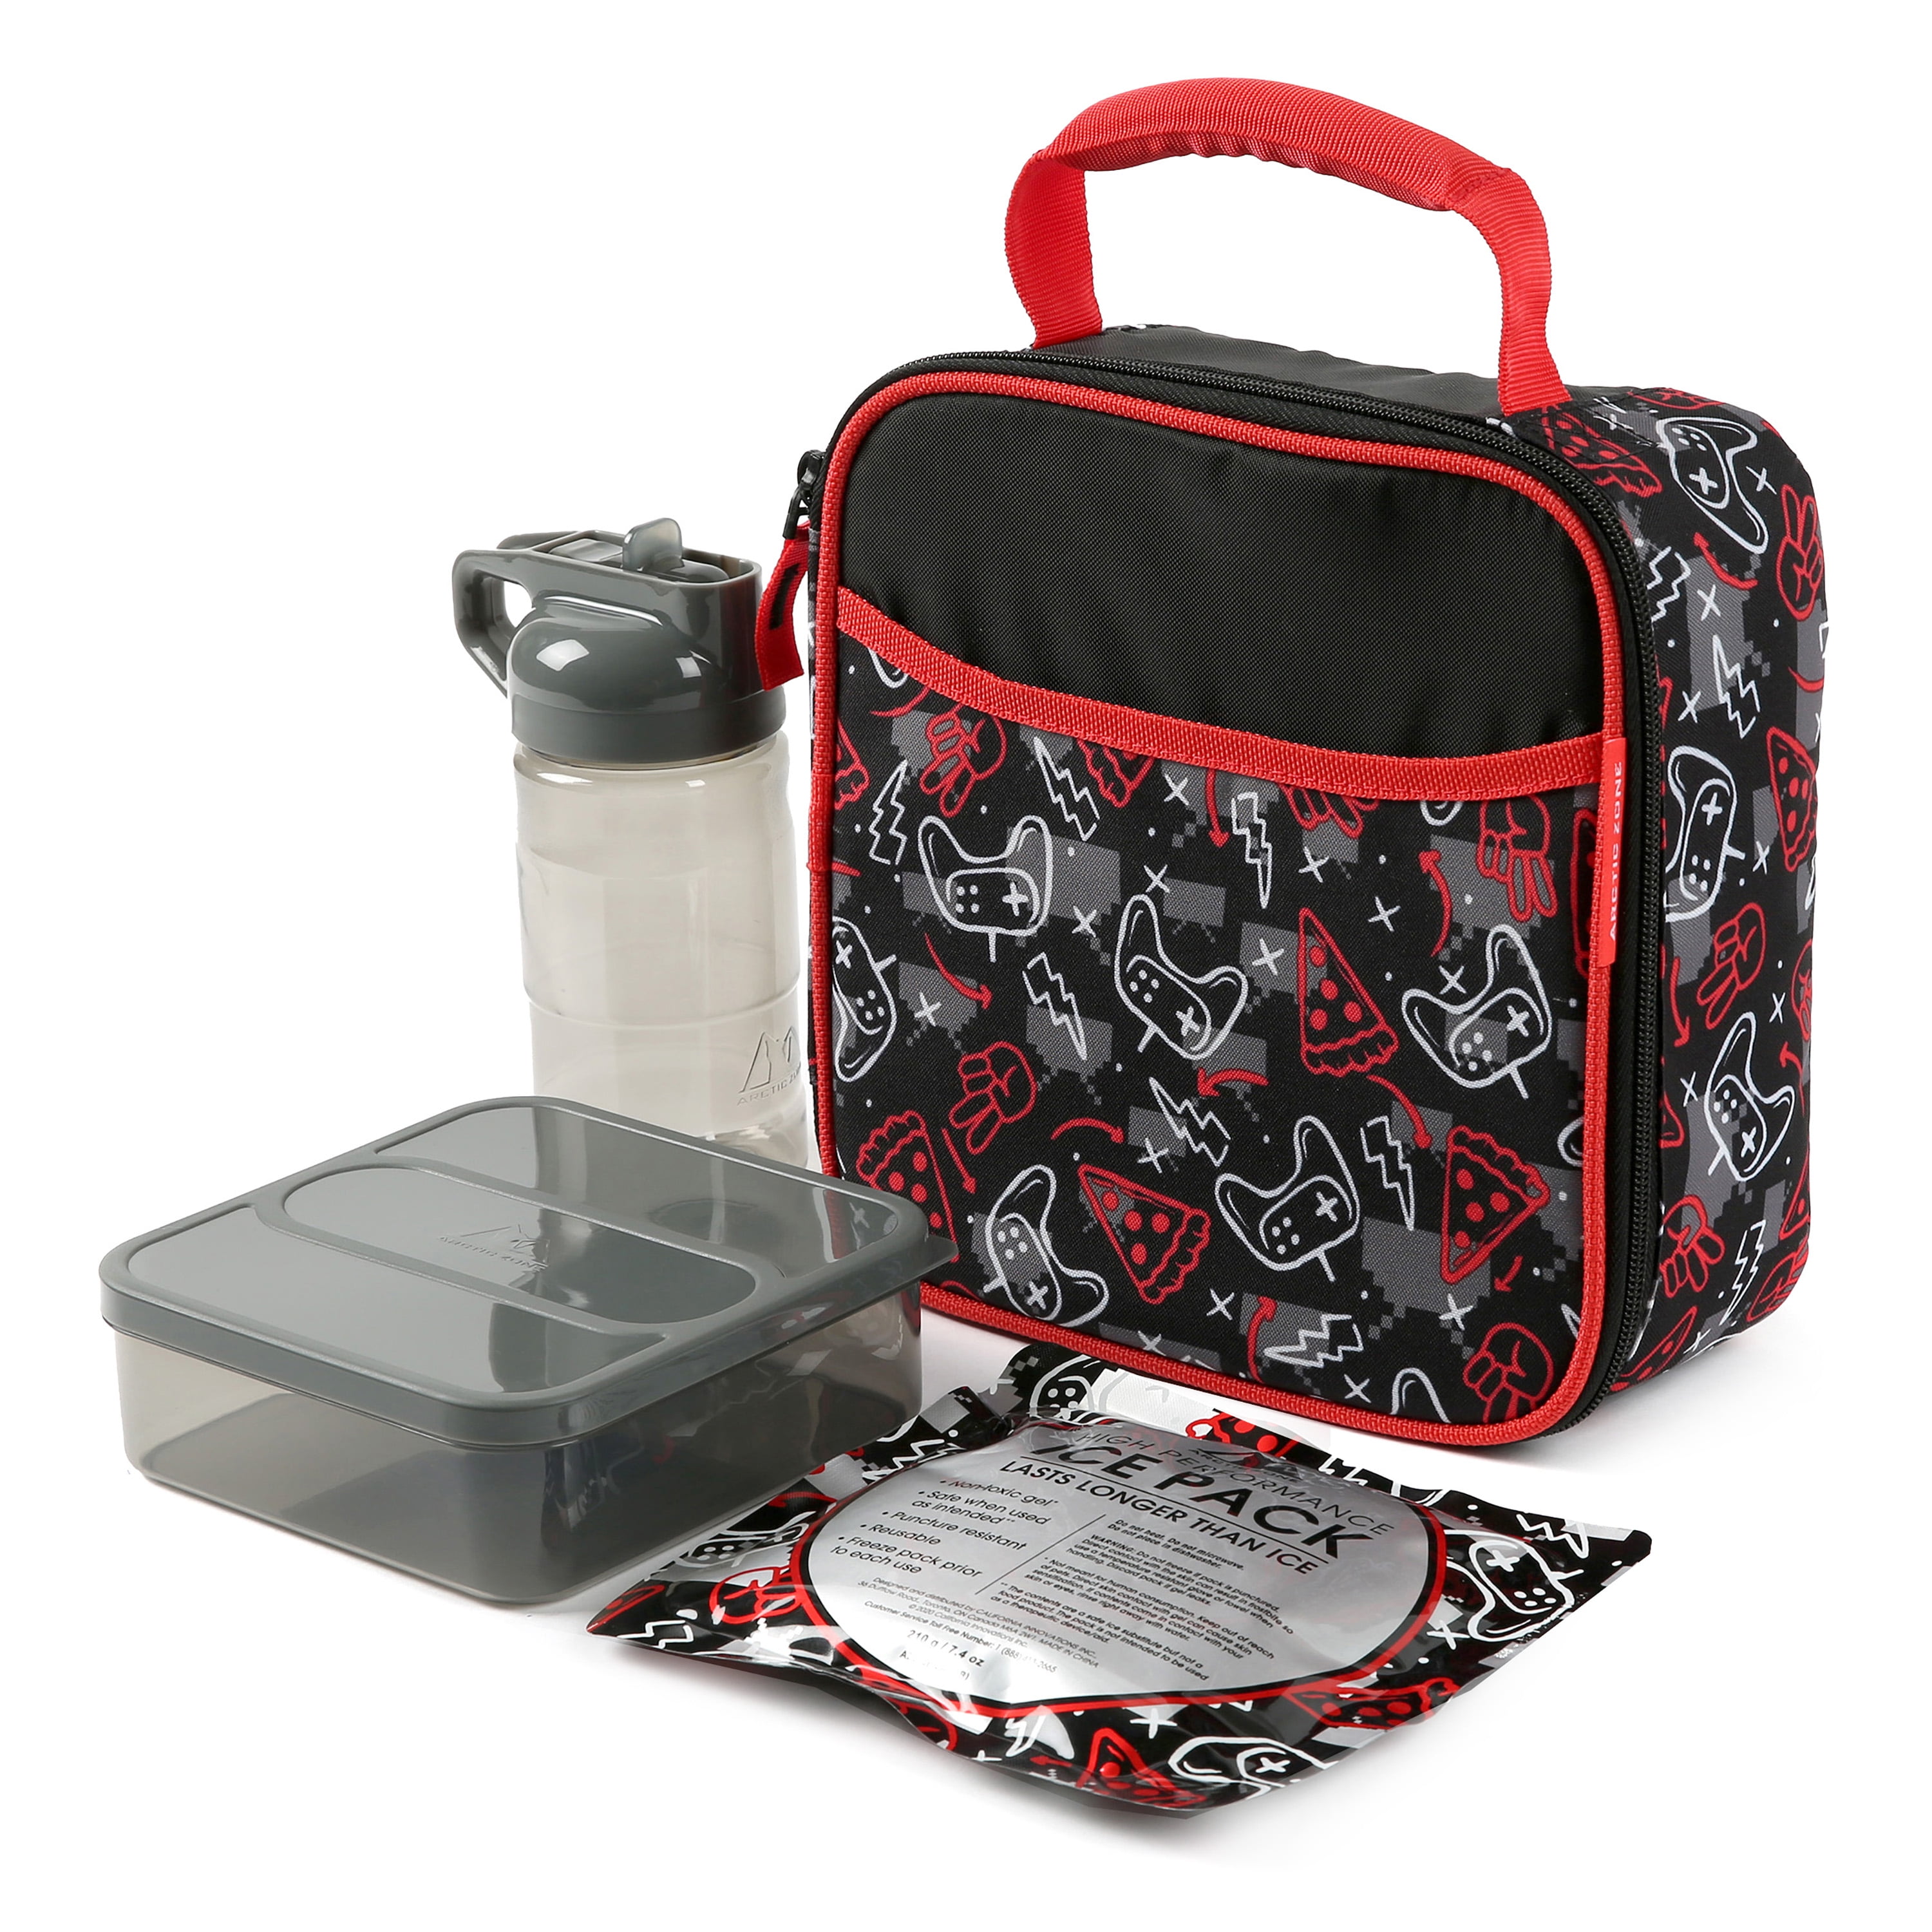 Arctic Zone Upright Reusable Lunch Box Combo with Accessories, Gingham 